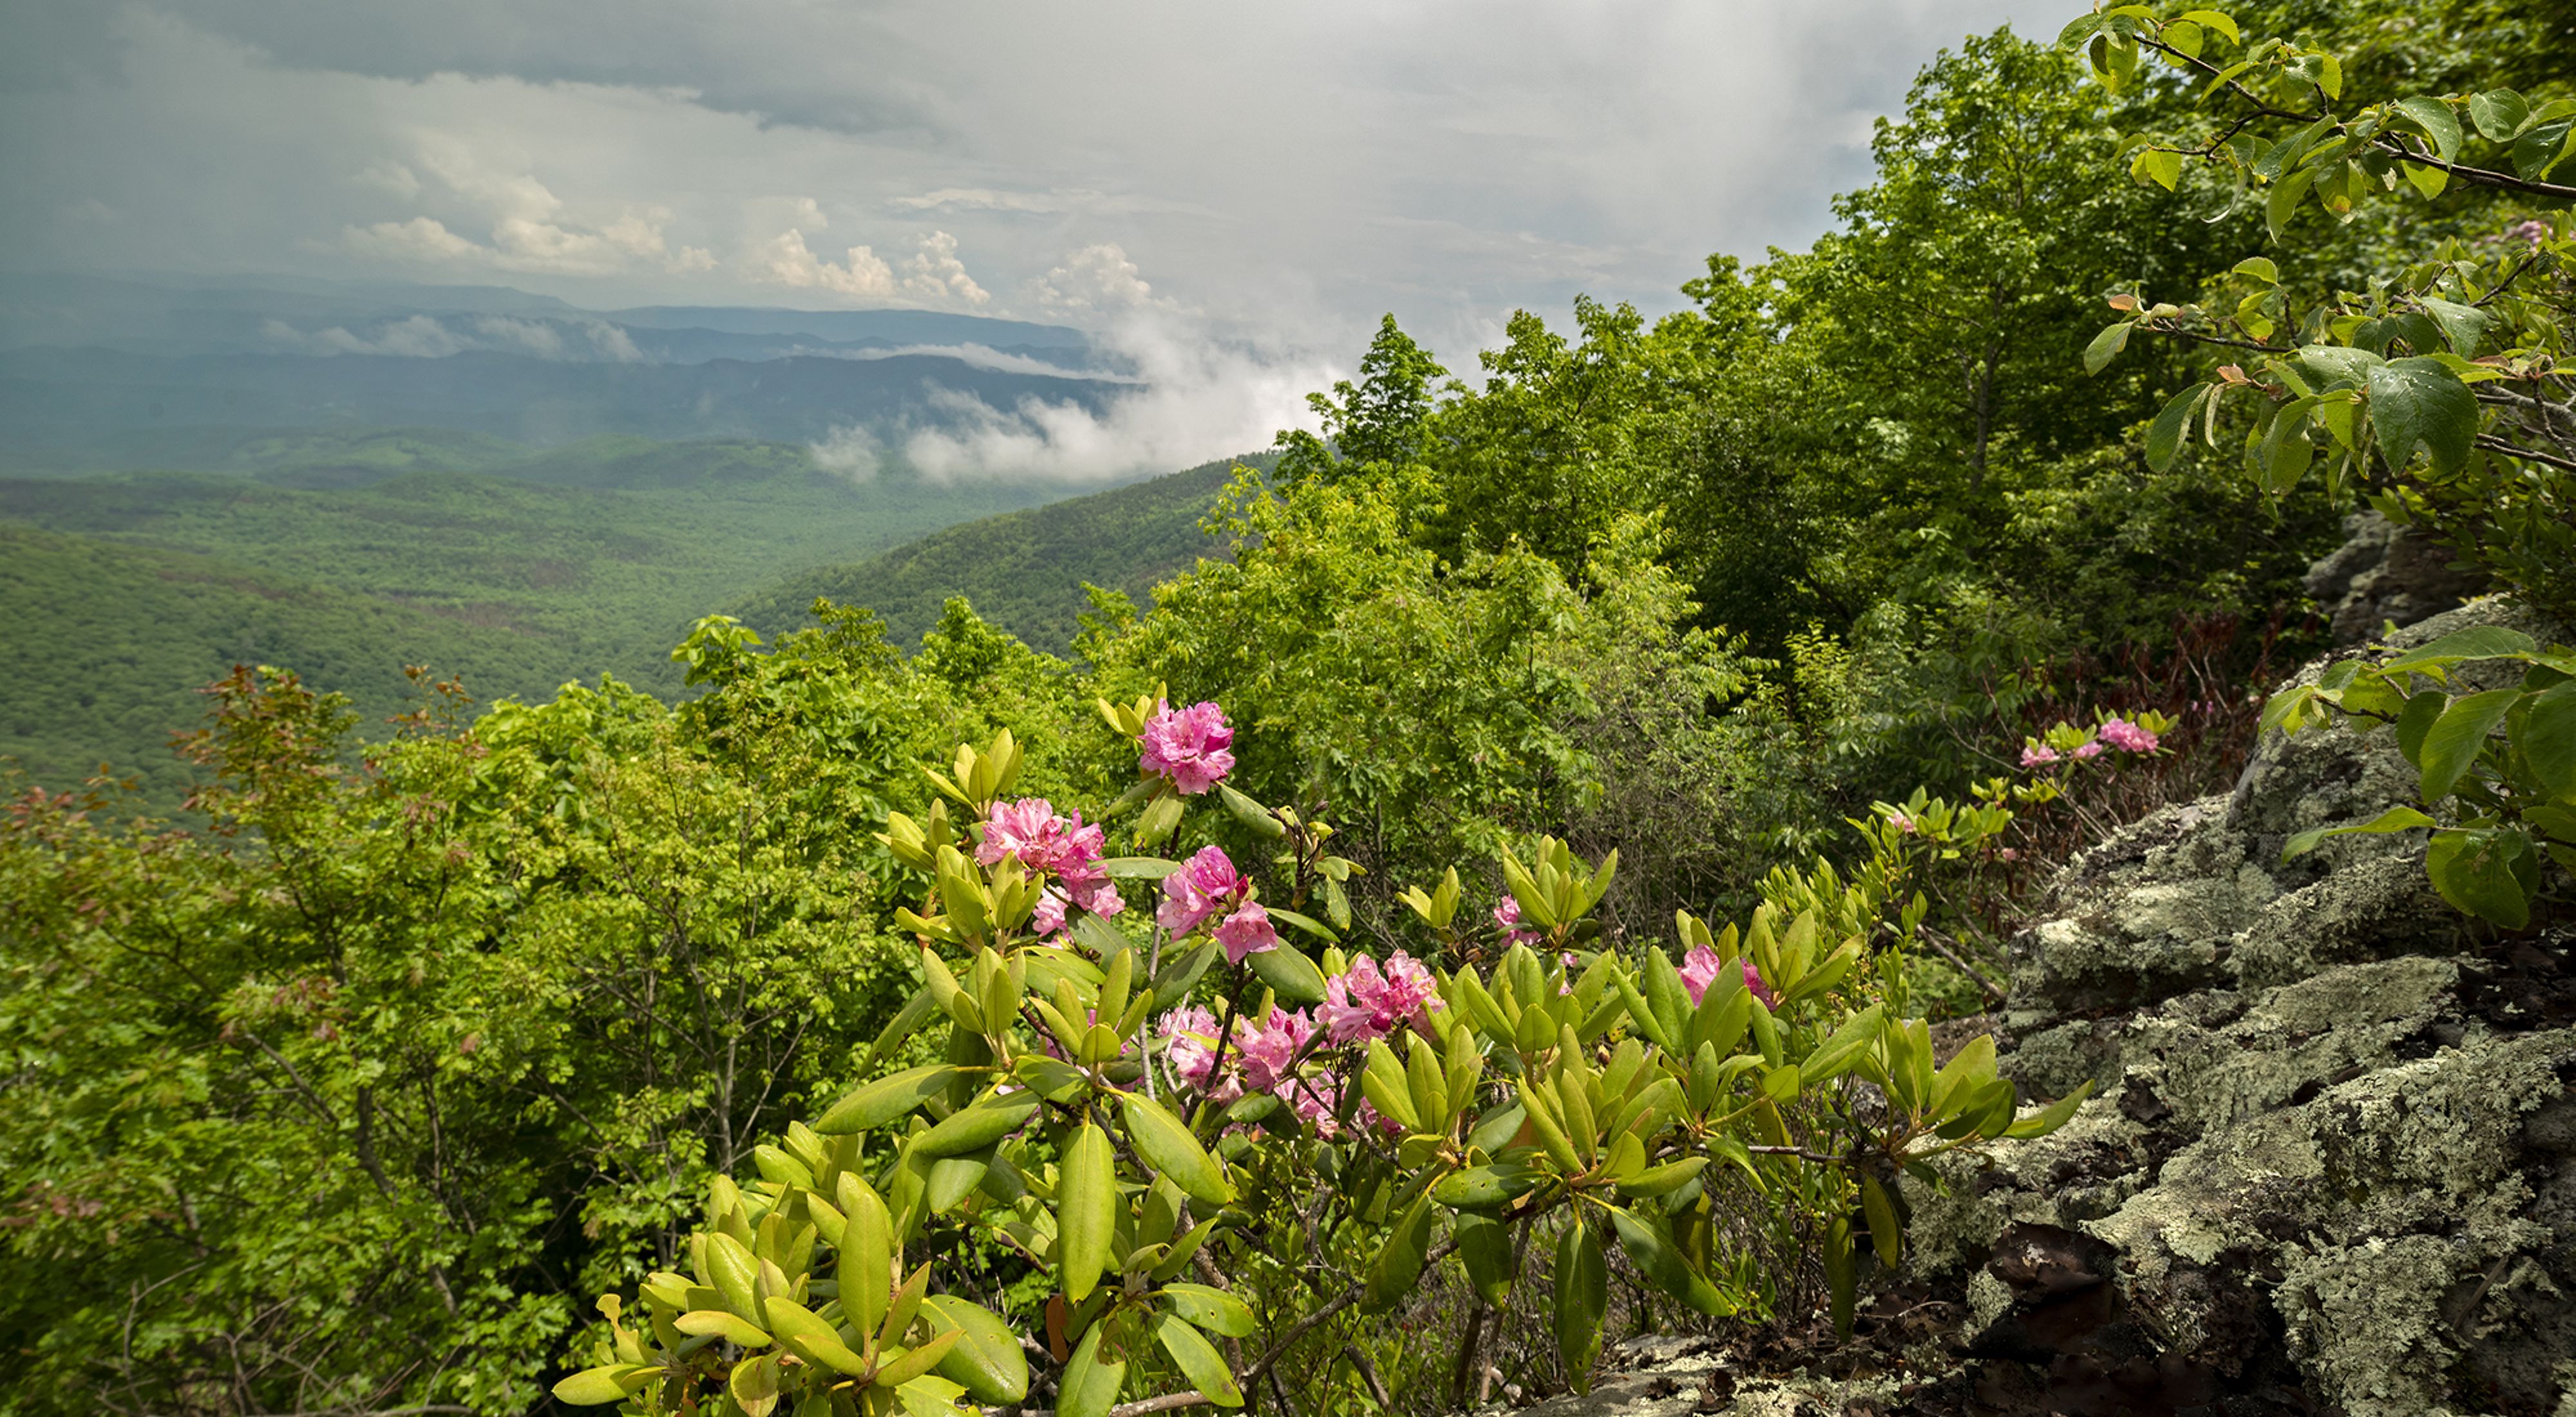 Bright pink flowers grow at the edge of a rocky mountain overlook. Thick white clouds rise from the valleys in the background in a line of mountain ridges that roll to the horizon.